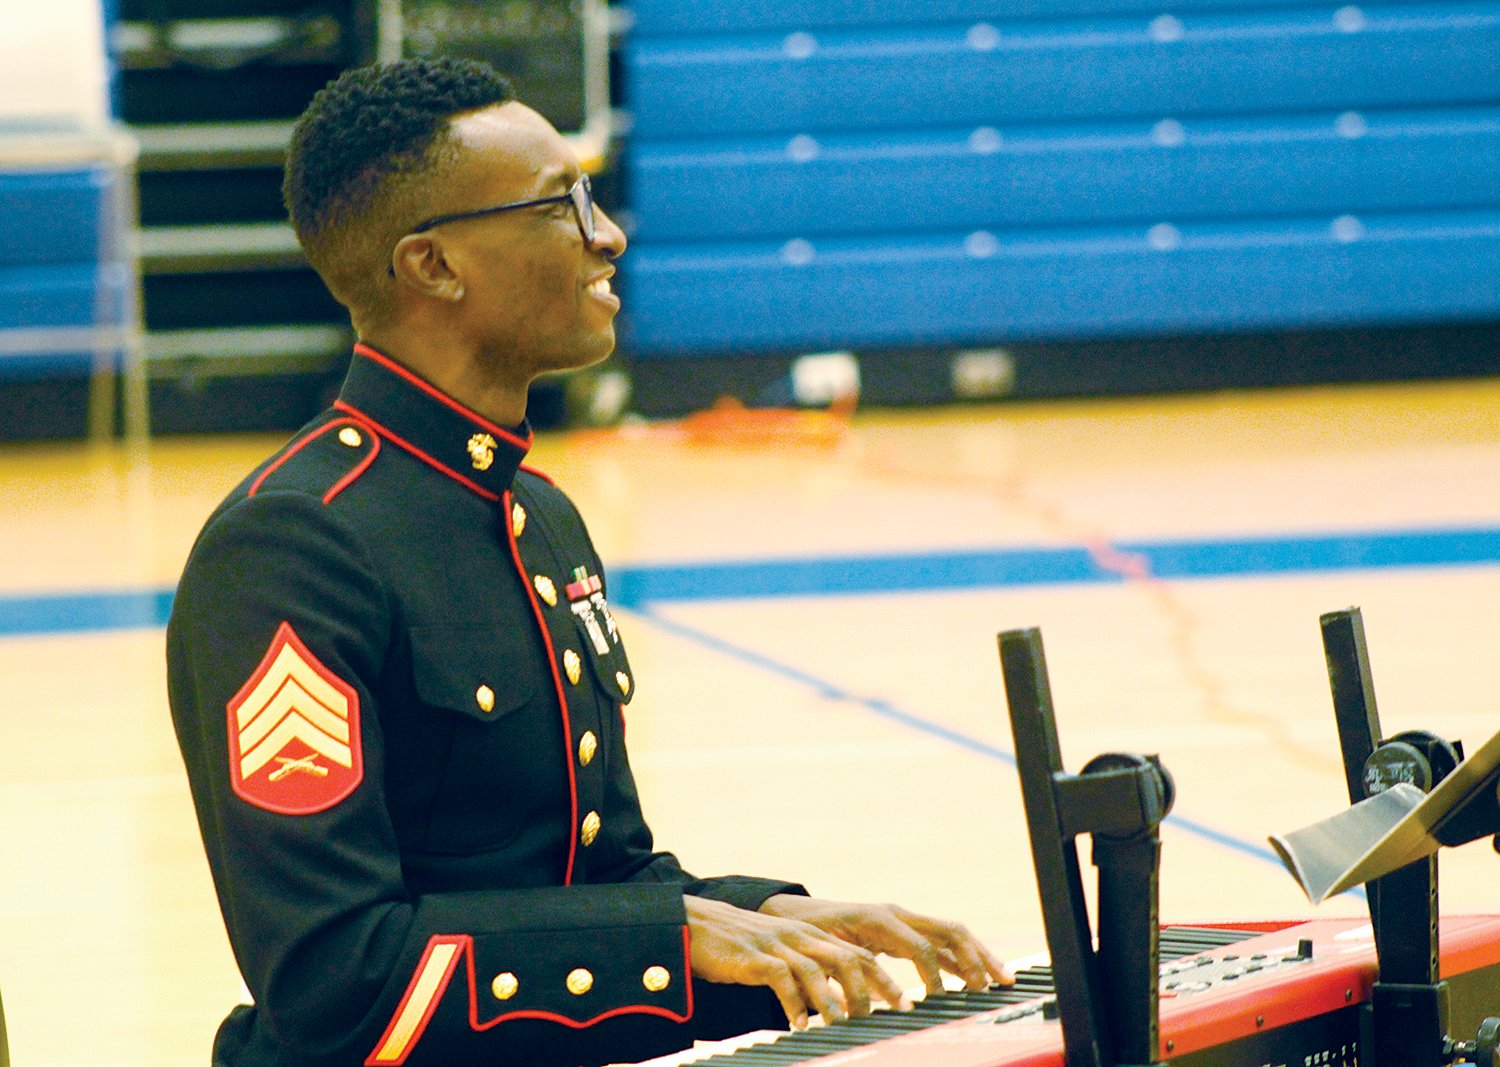 Sgt. Ronald Joseph and his skills on the the keyboard allowed the band to have a smooth accompaniment to their performance.